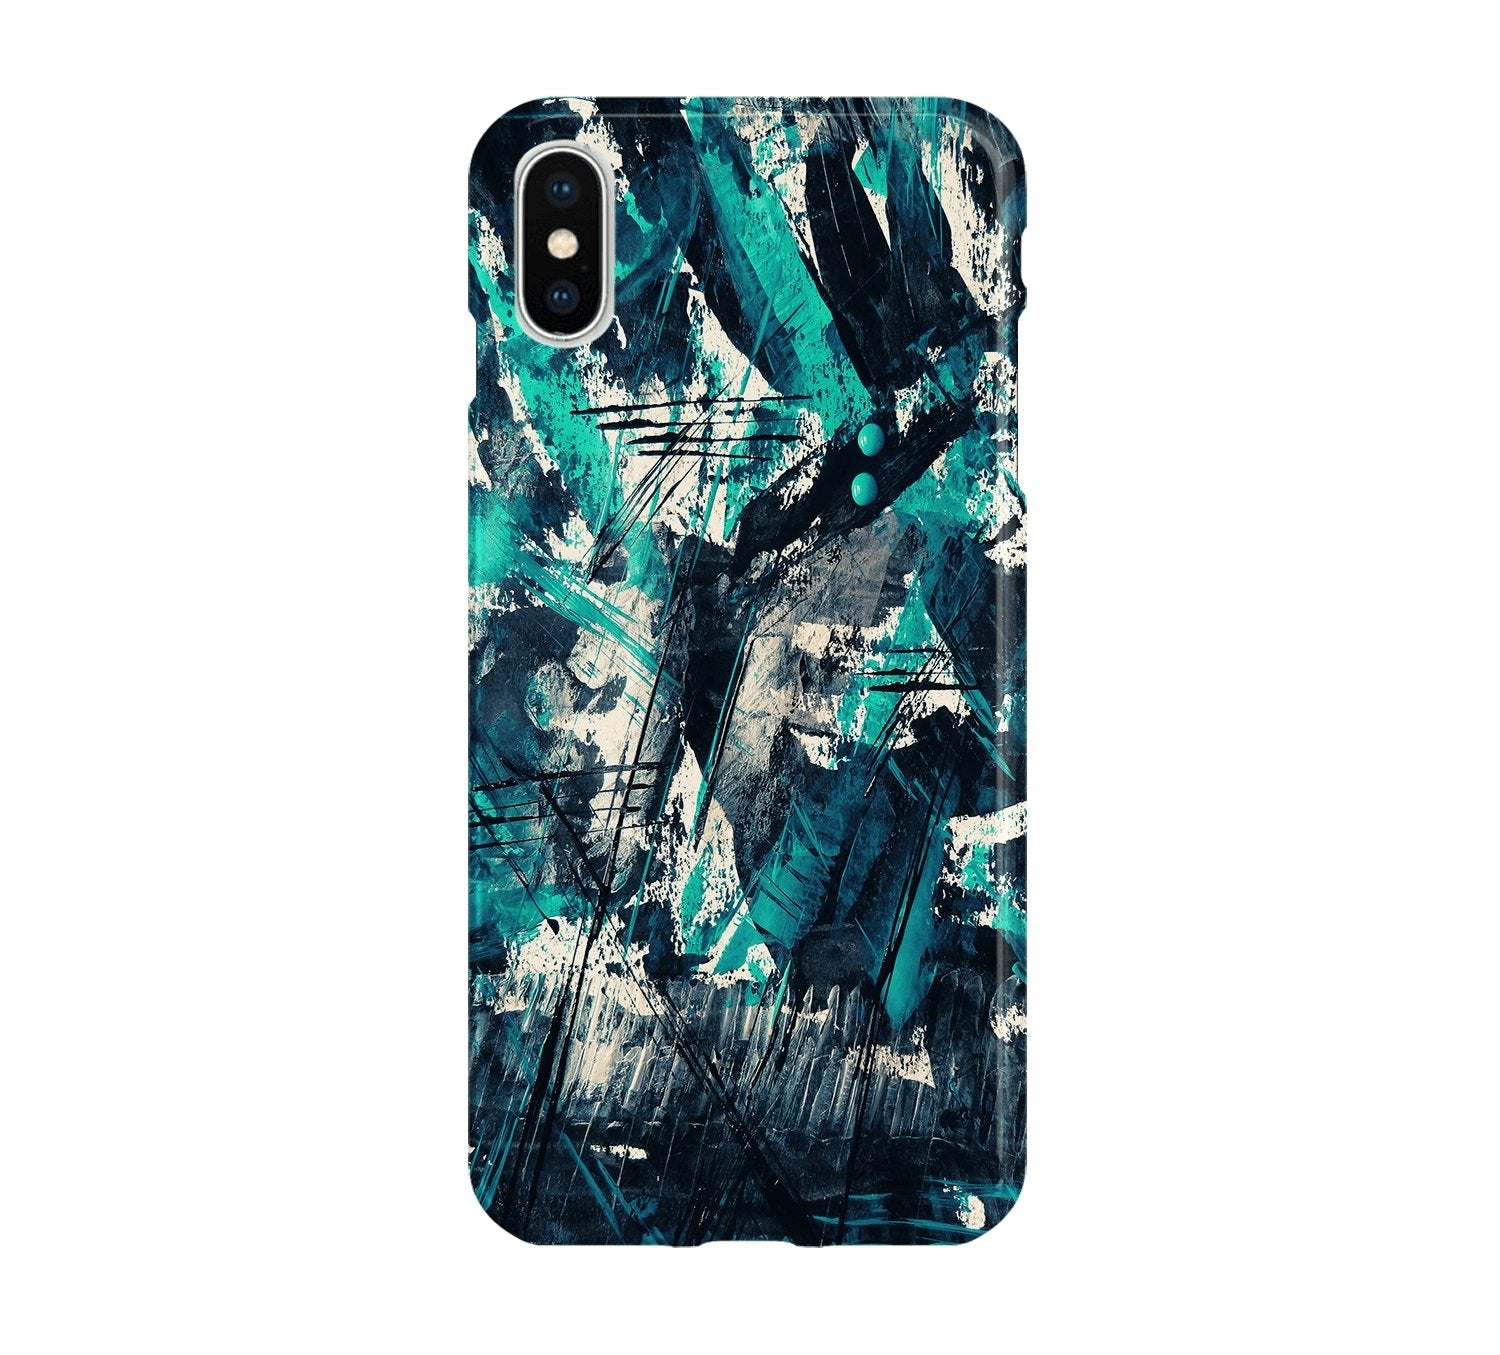 Blue Chaos - iPhone phone case designs by CaseSwagger